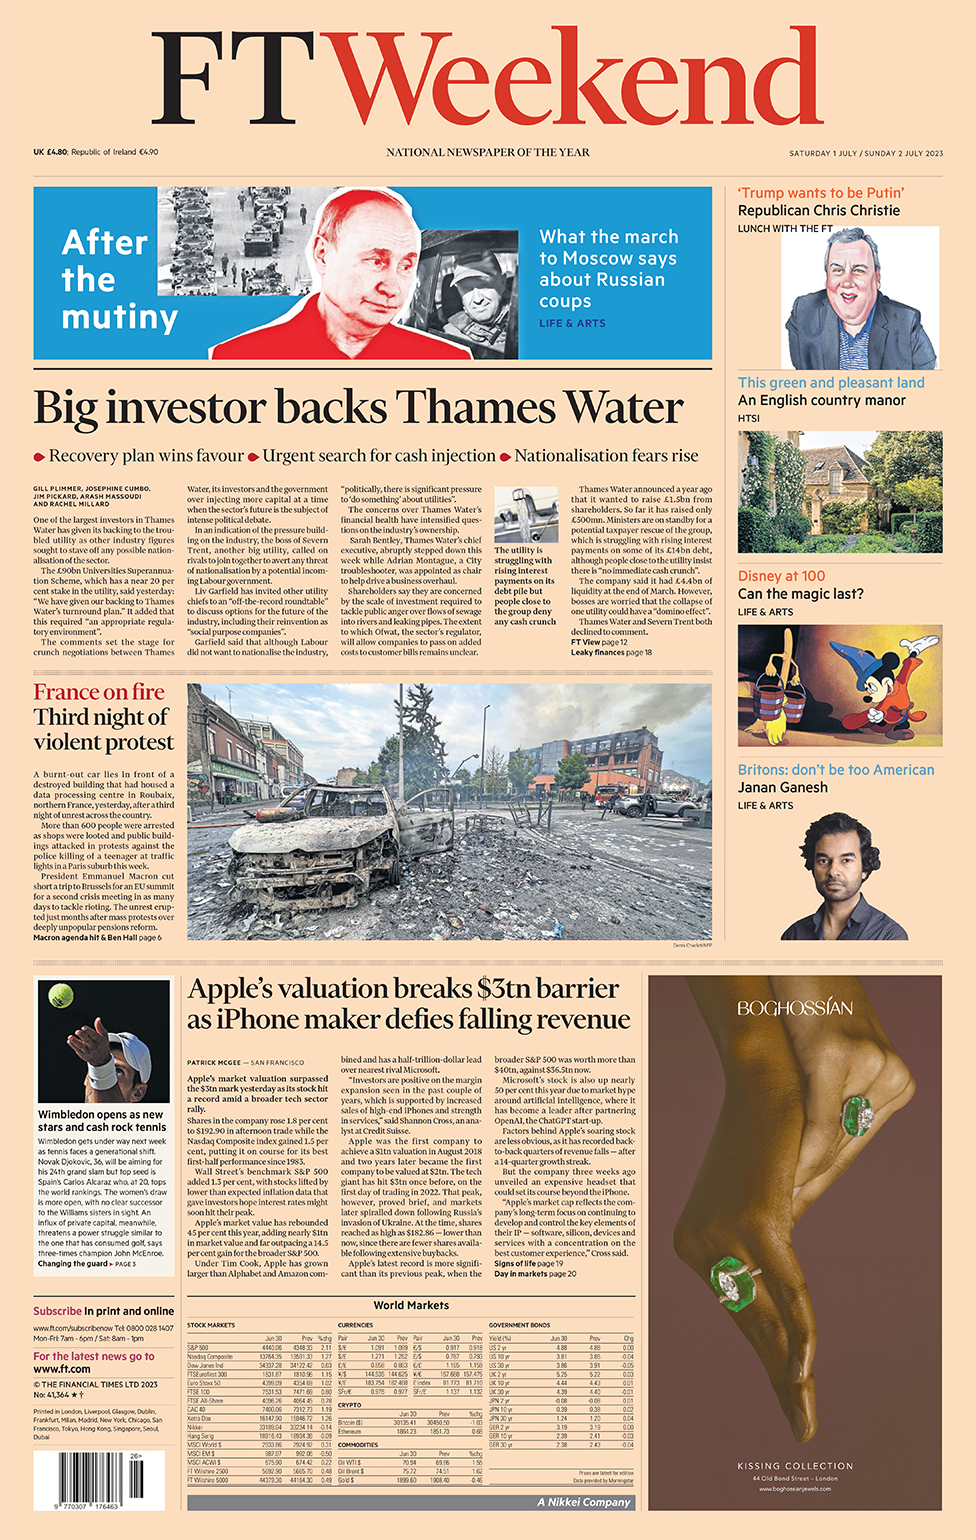 The headline in the FT Weekend reads: "Big investor backs Thames Water"